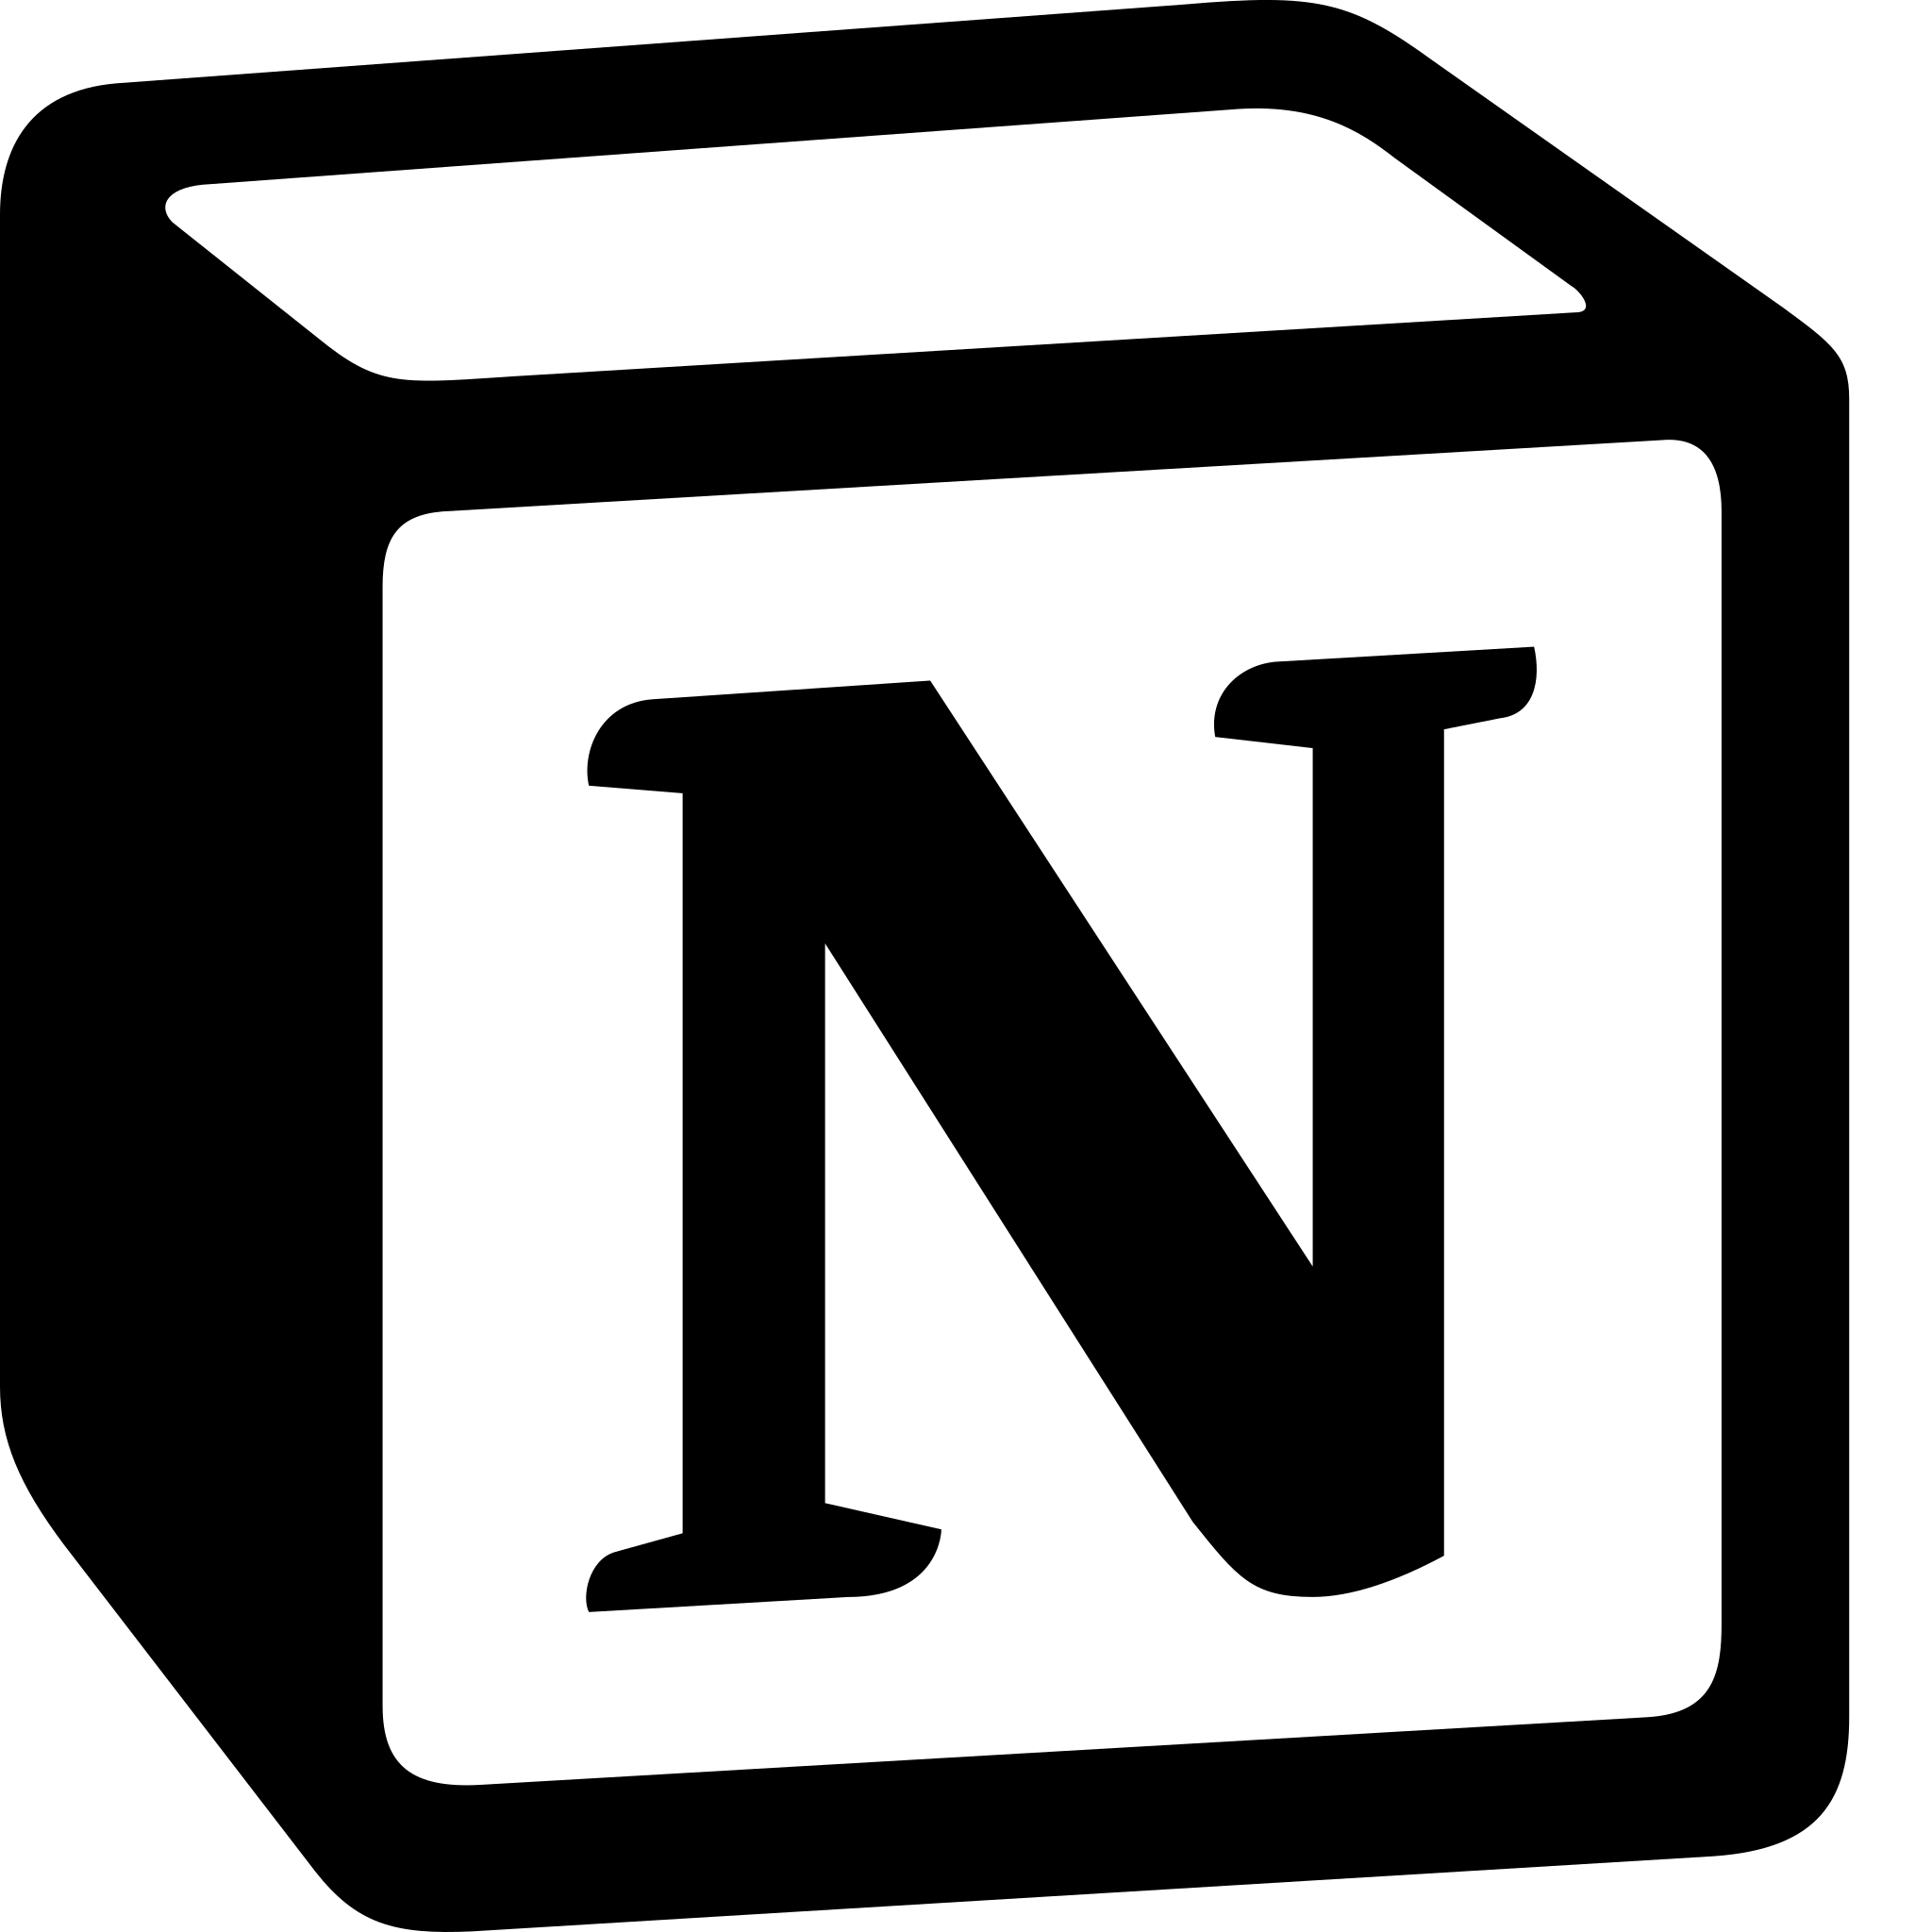 How to learn Notion?